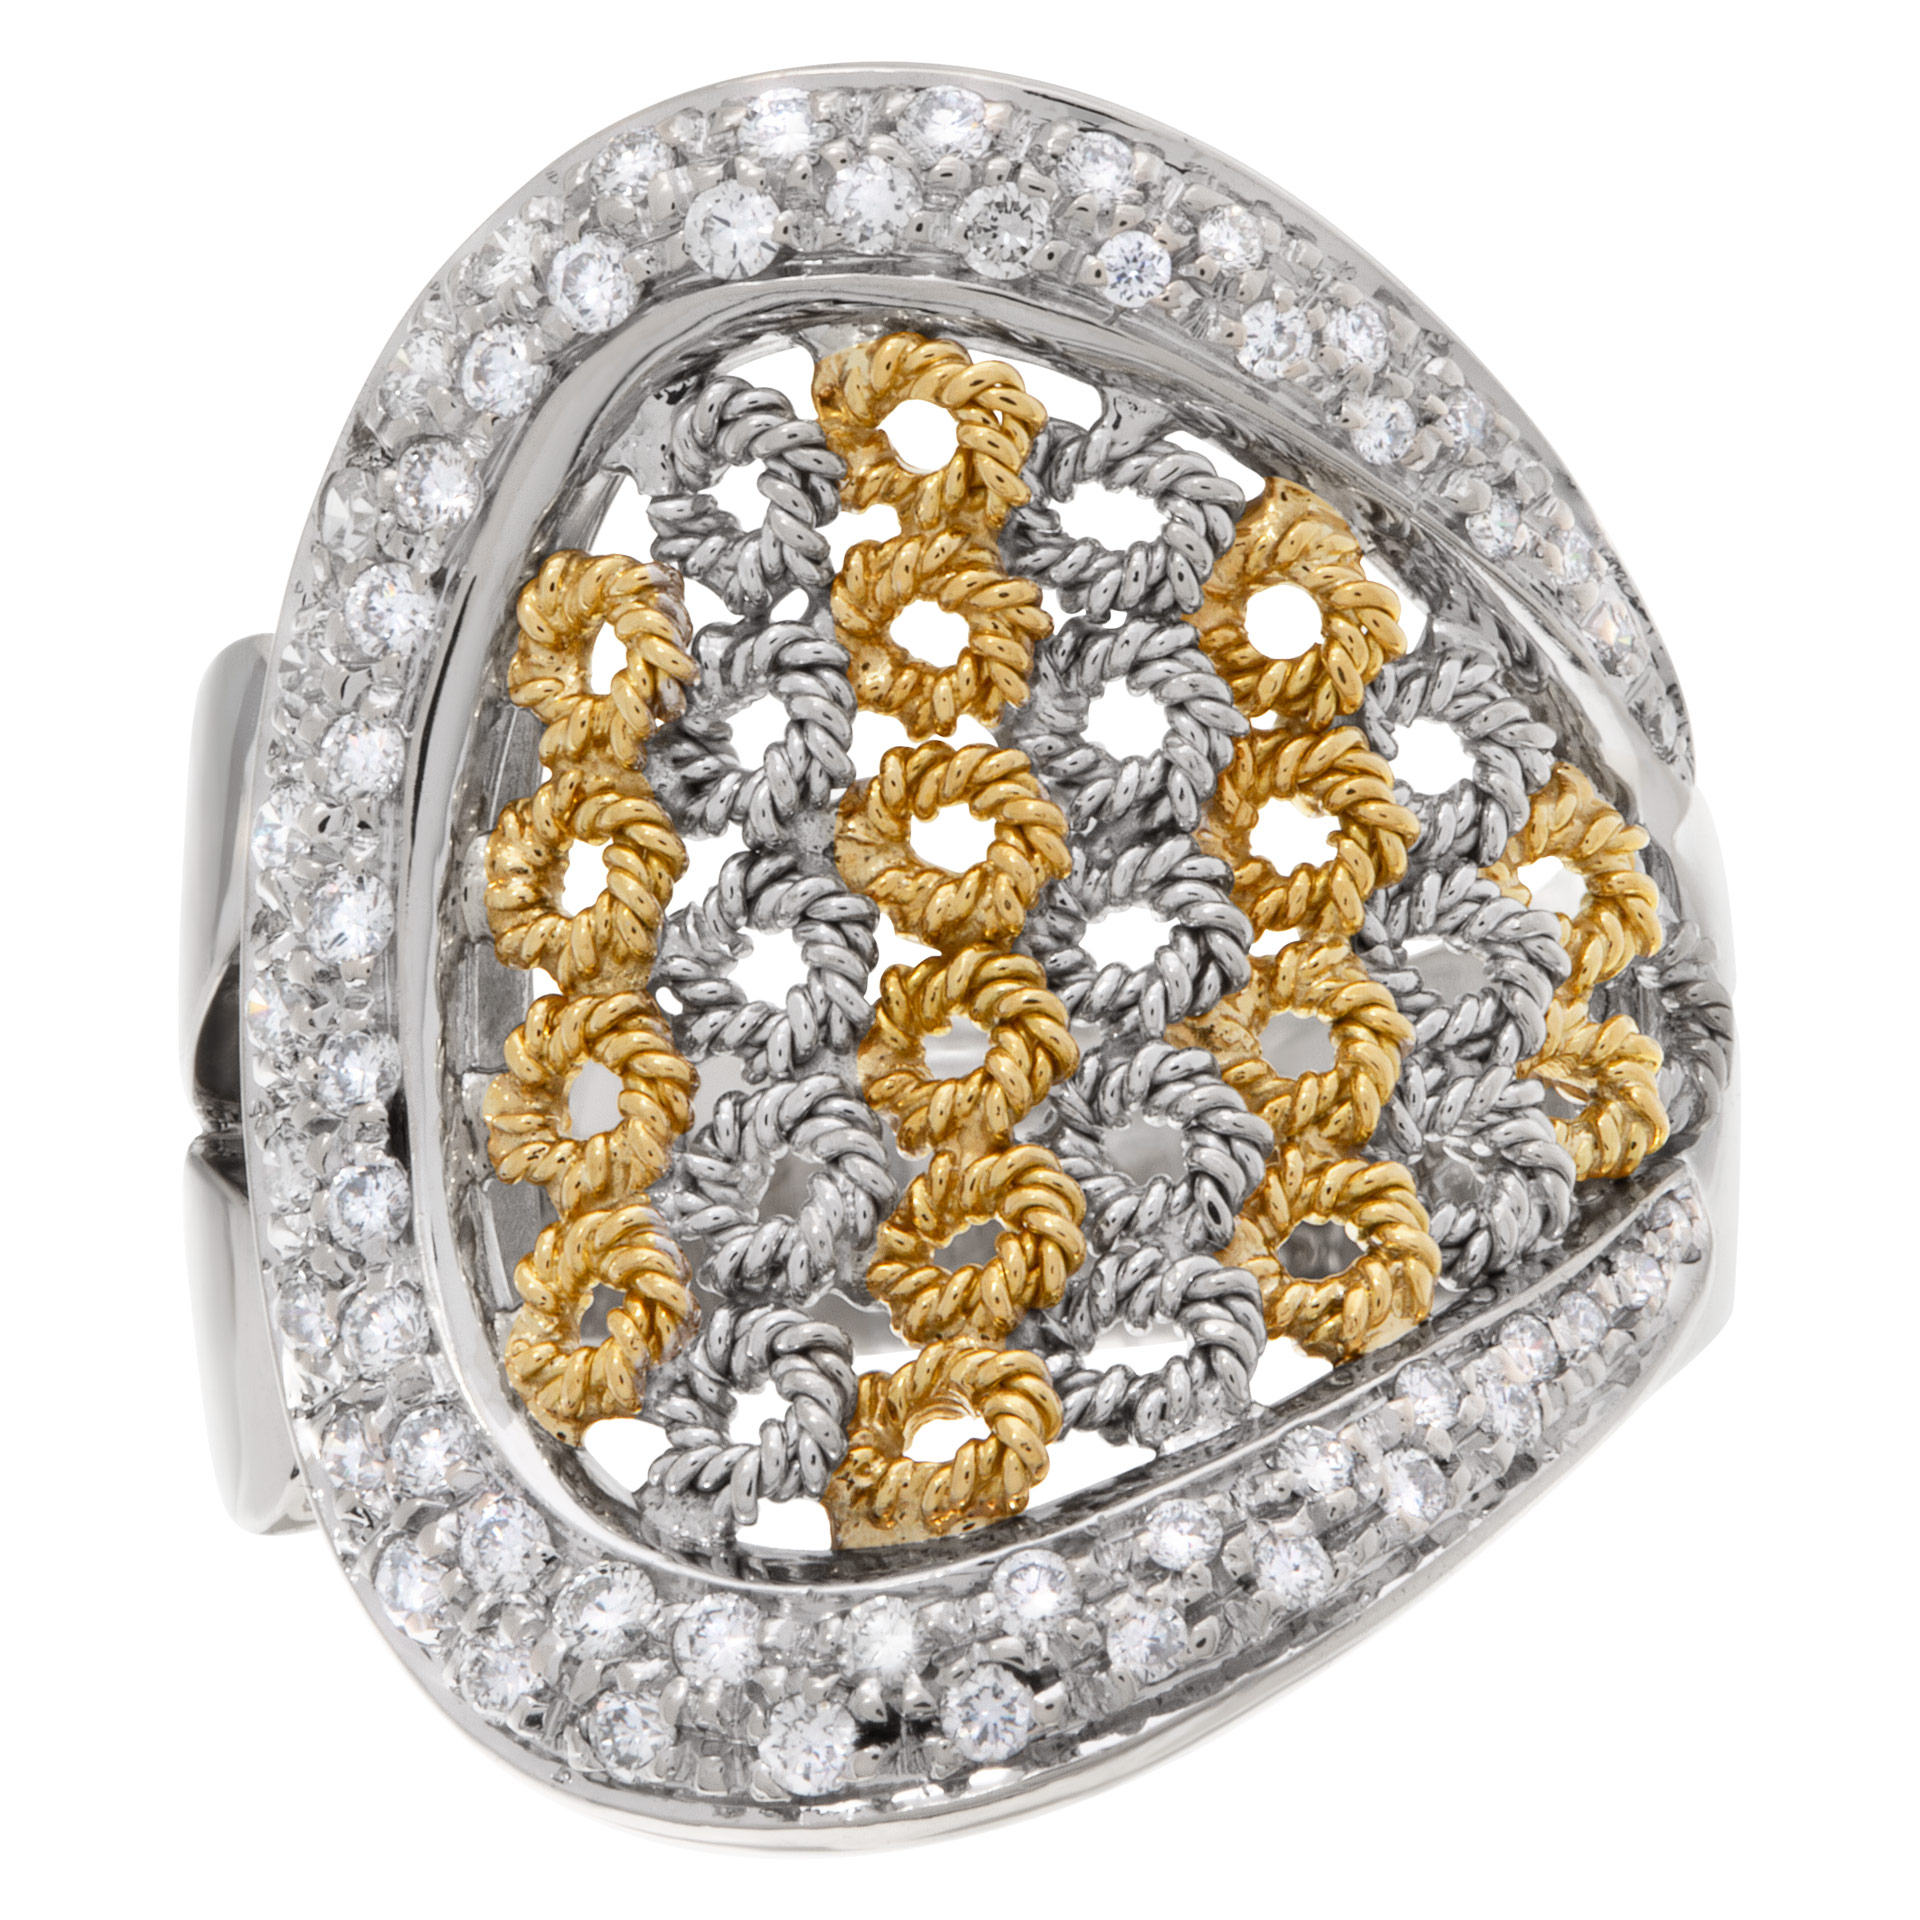 Basket weave with surrounding pave diamonds in 18k white and yellow gold